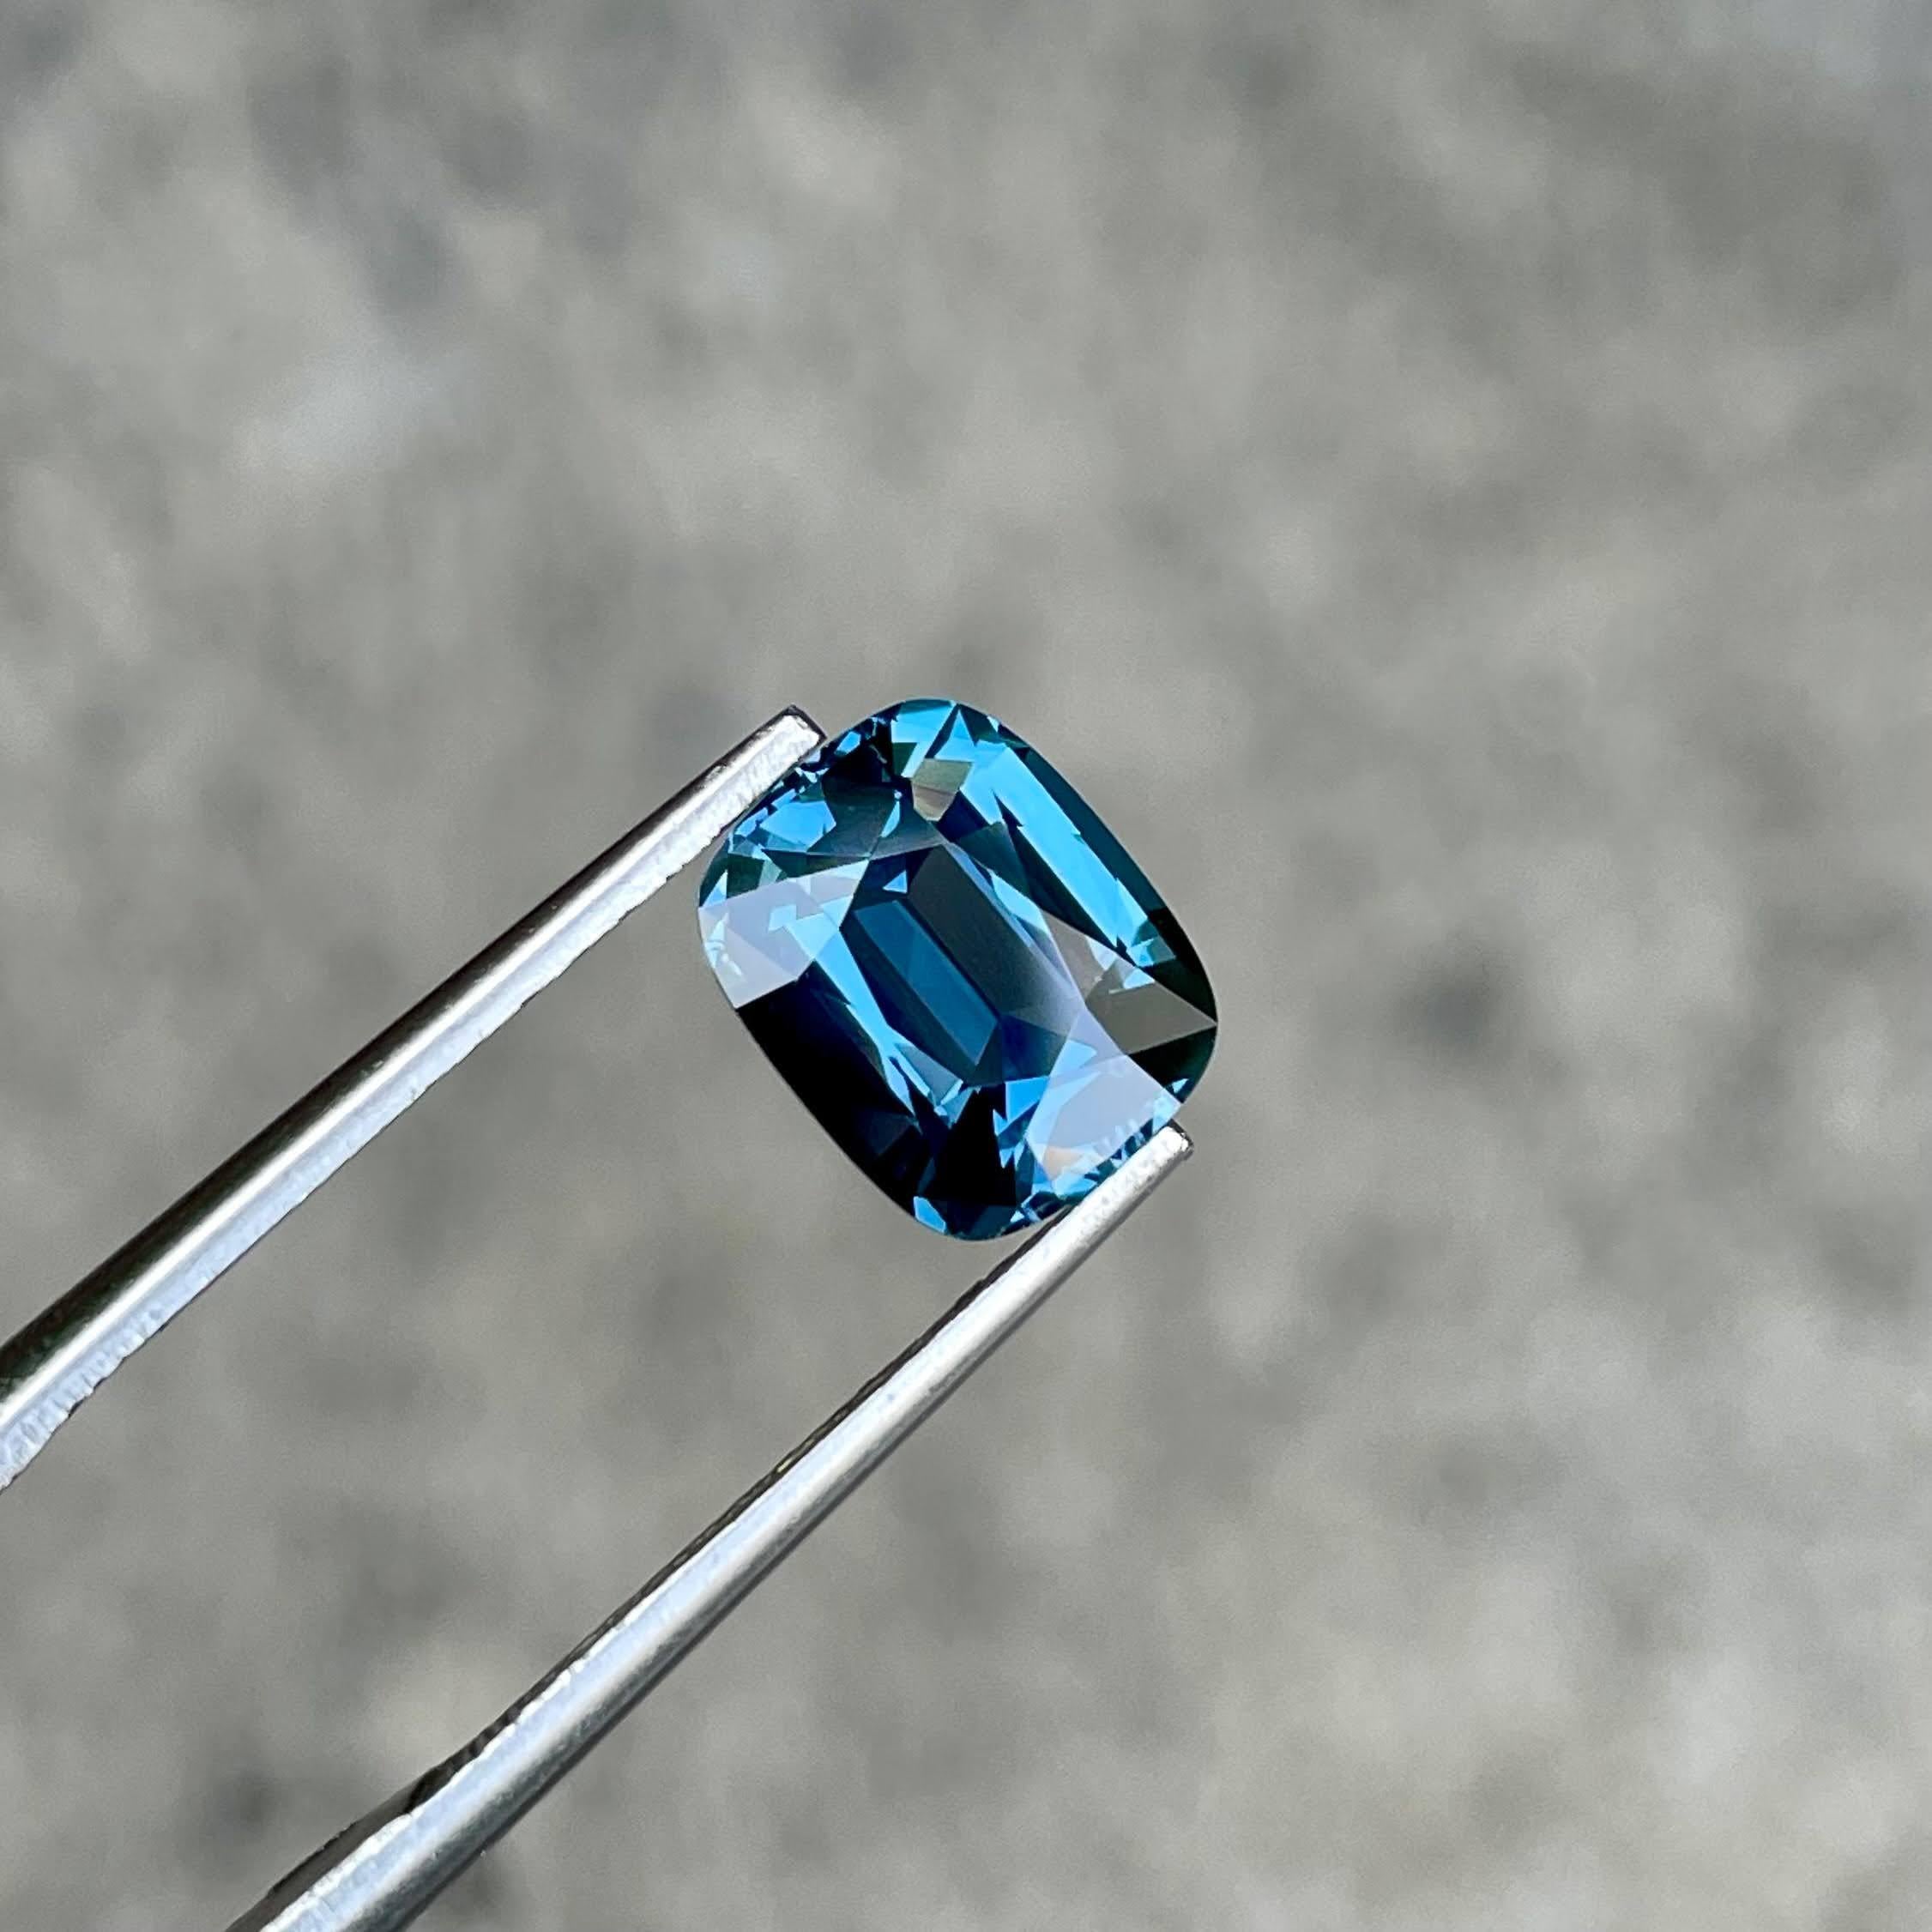 Weight 2.54 carats 
Dimensions 8.76x7.04x4.73 mm
Treatment none 
Origin Tanzania 
Clarity eye clean 
Cut Fancy Cushion
Shape Cushion




The 2.54 carat Blue Spinel Stone is an exquisite example of natural Tanzanian beauty, showcasing a captivating